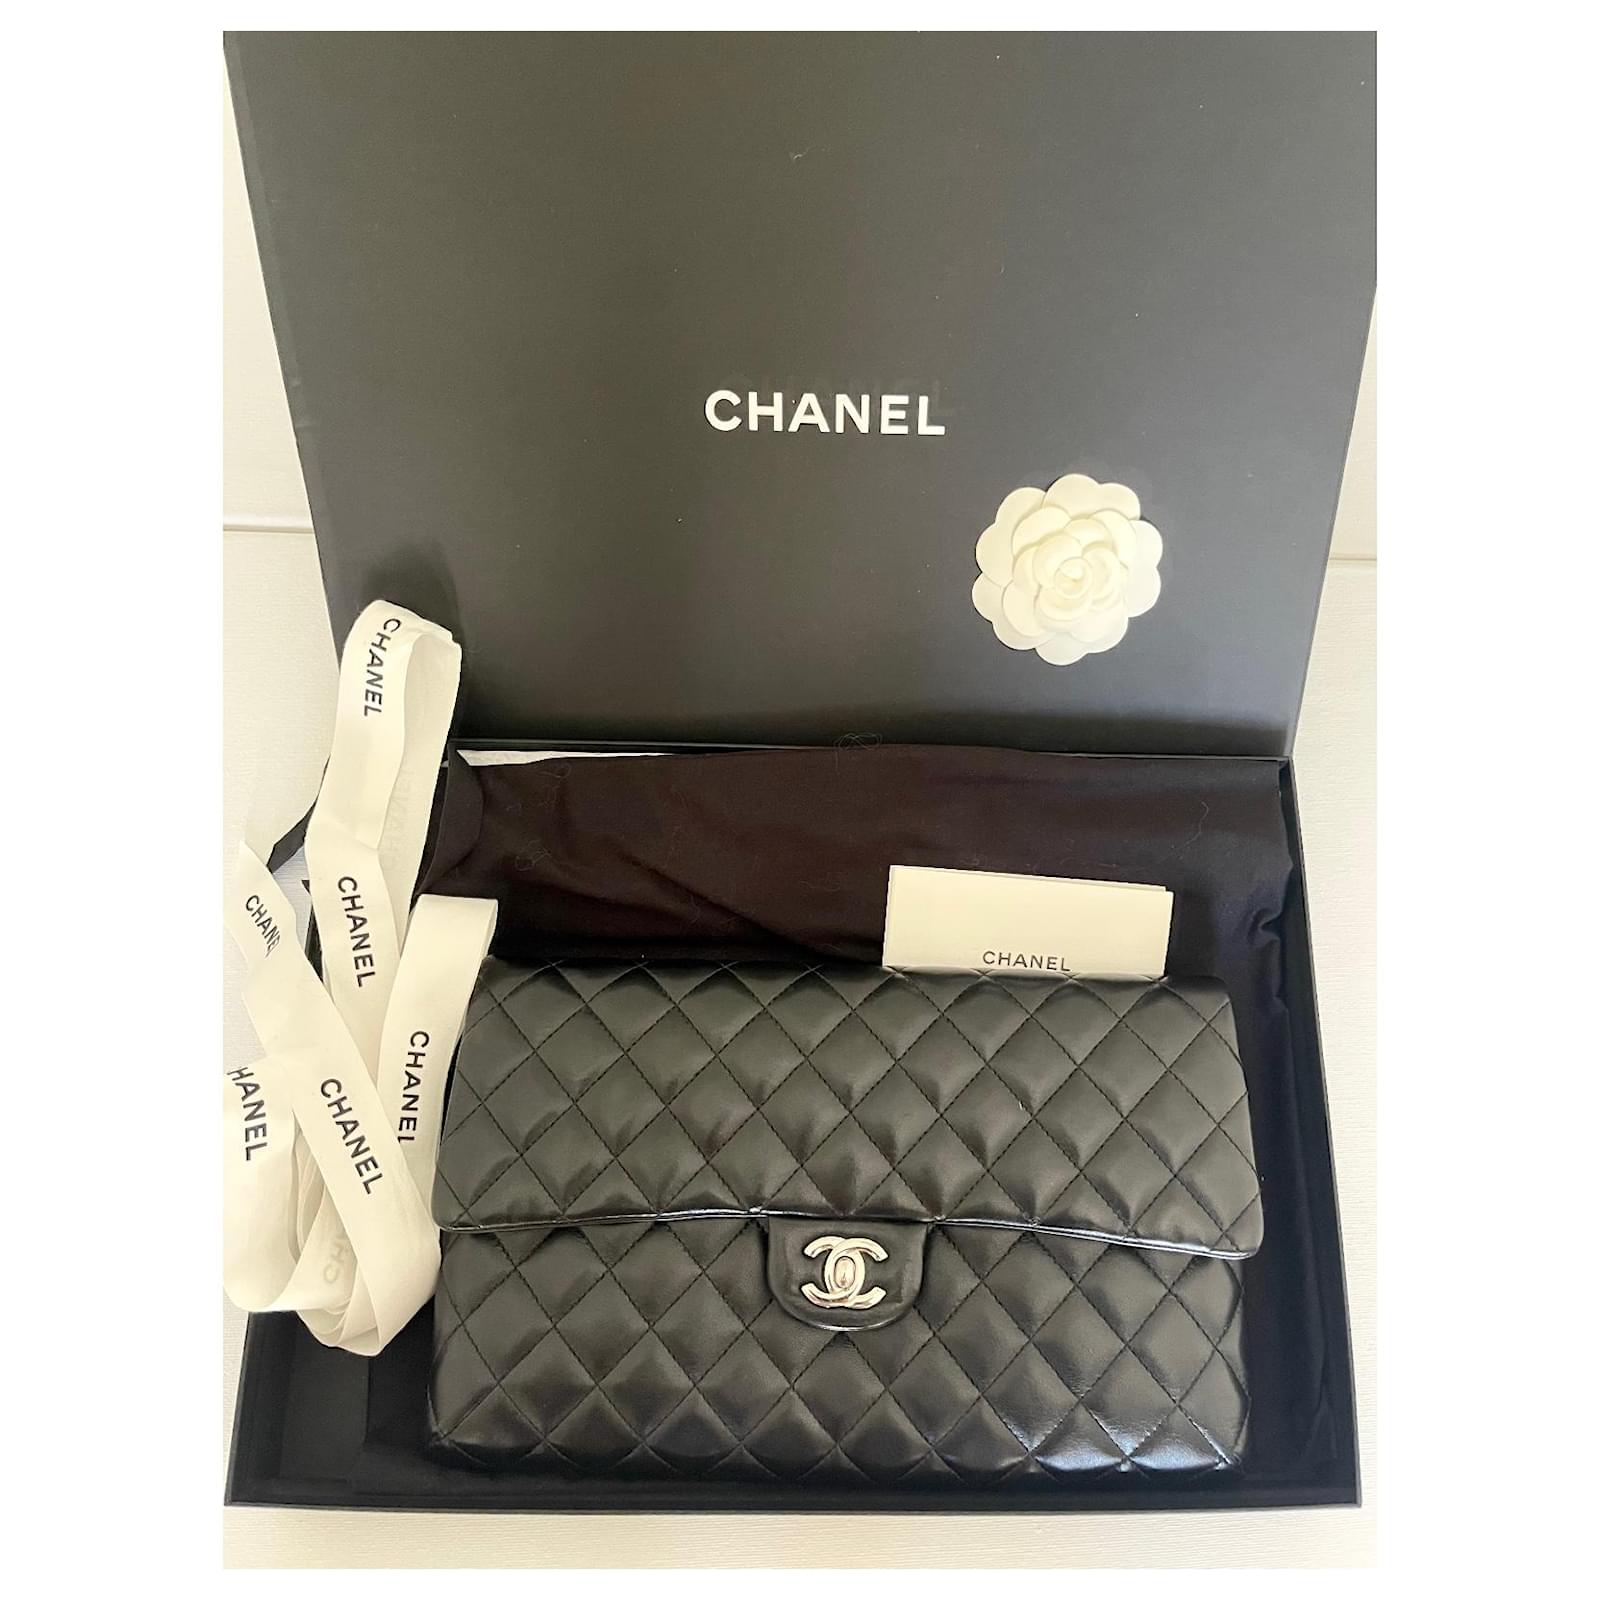 Handbags Chanel Chanel Timeless Classic Flap Bag Large in Clutch Format Rare